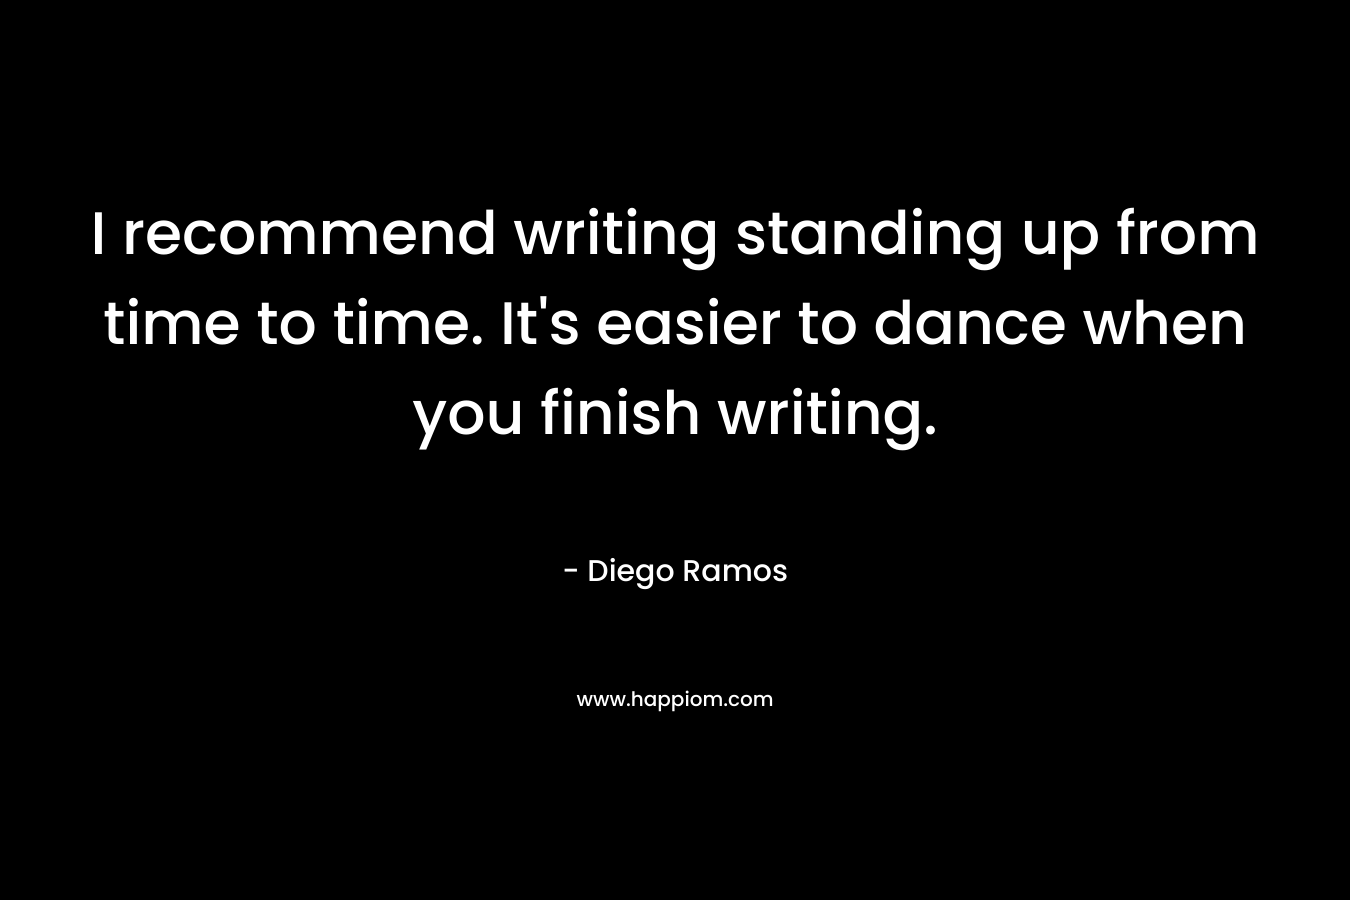 I recommend writing standing up from time to time. It’s easier to dance when you finish writing. – Diego Ramos